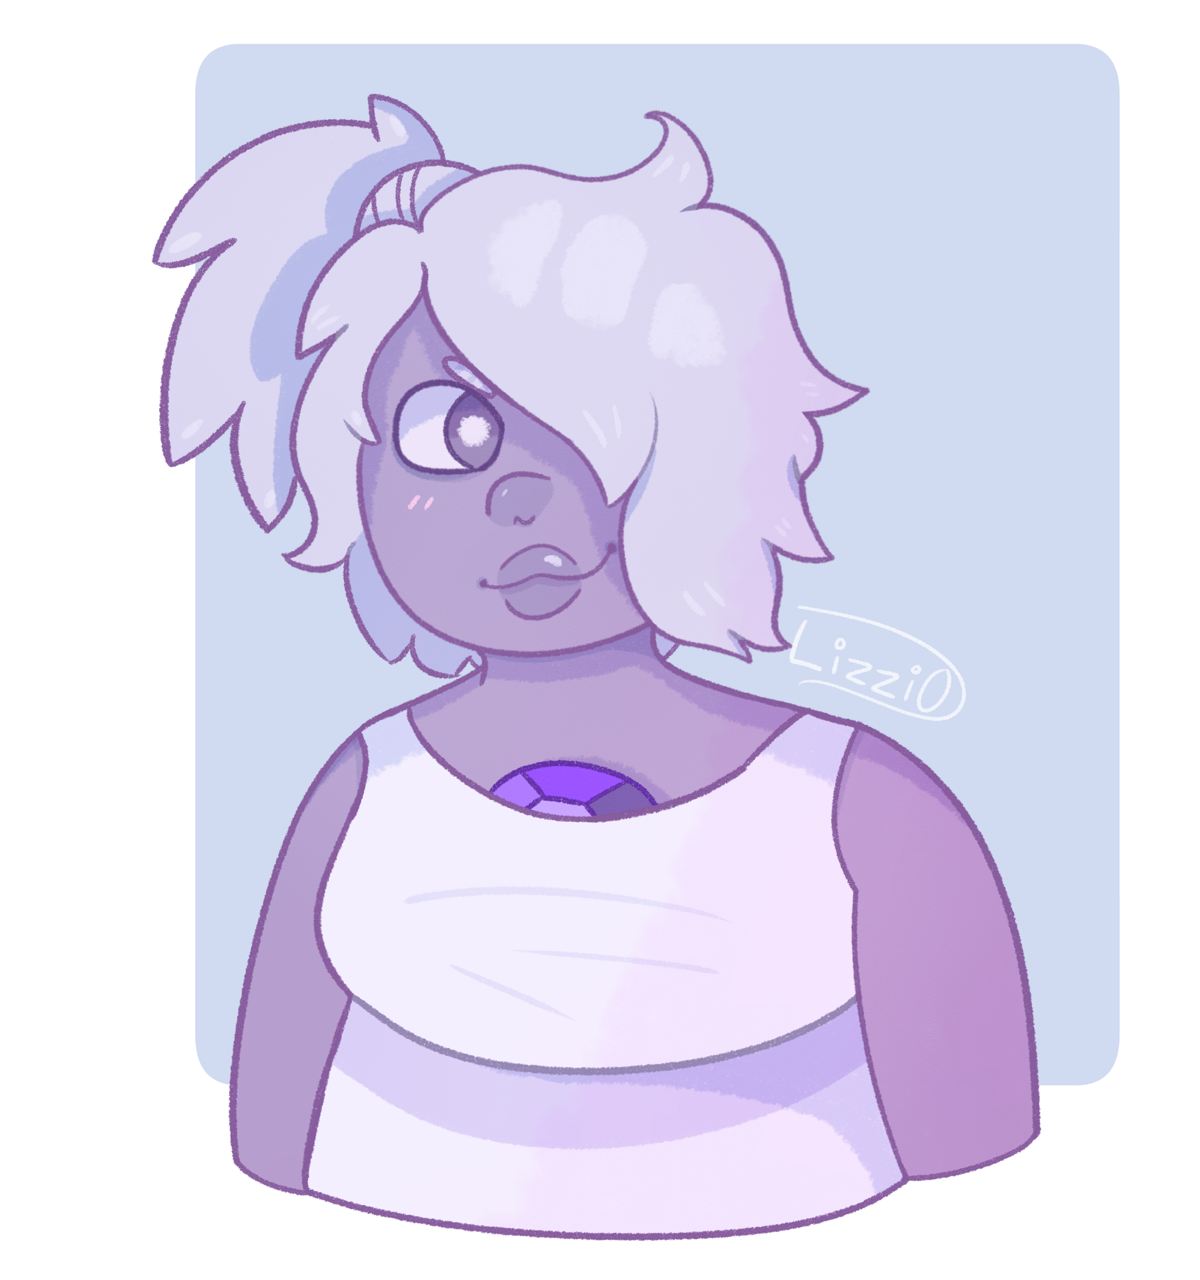 Some fanart of Amethyst by yours truly!